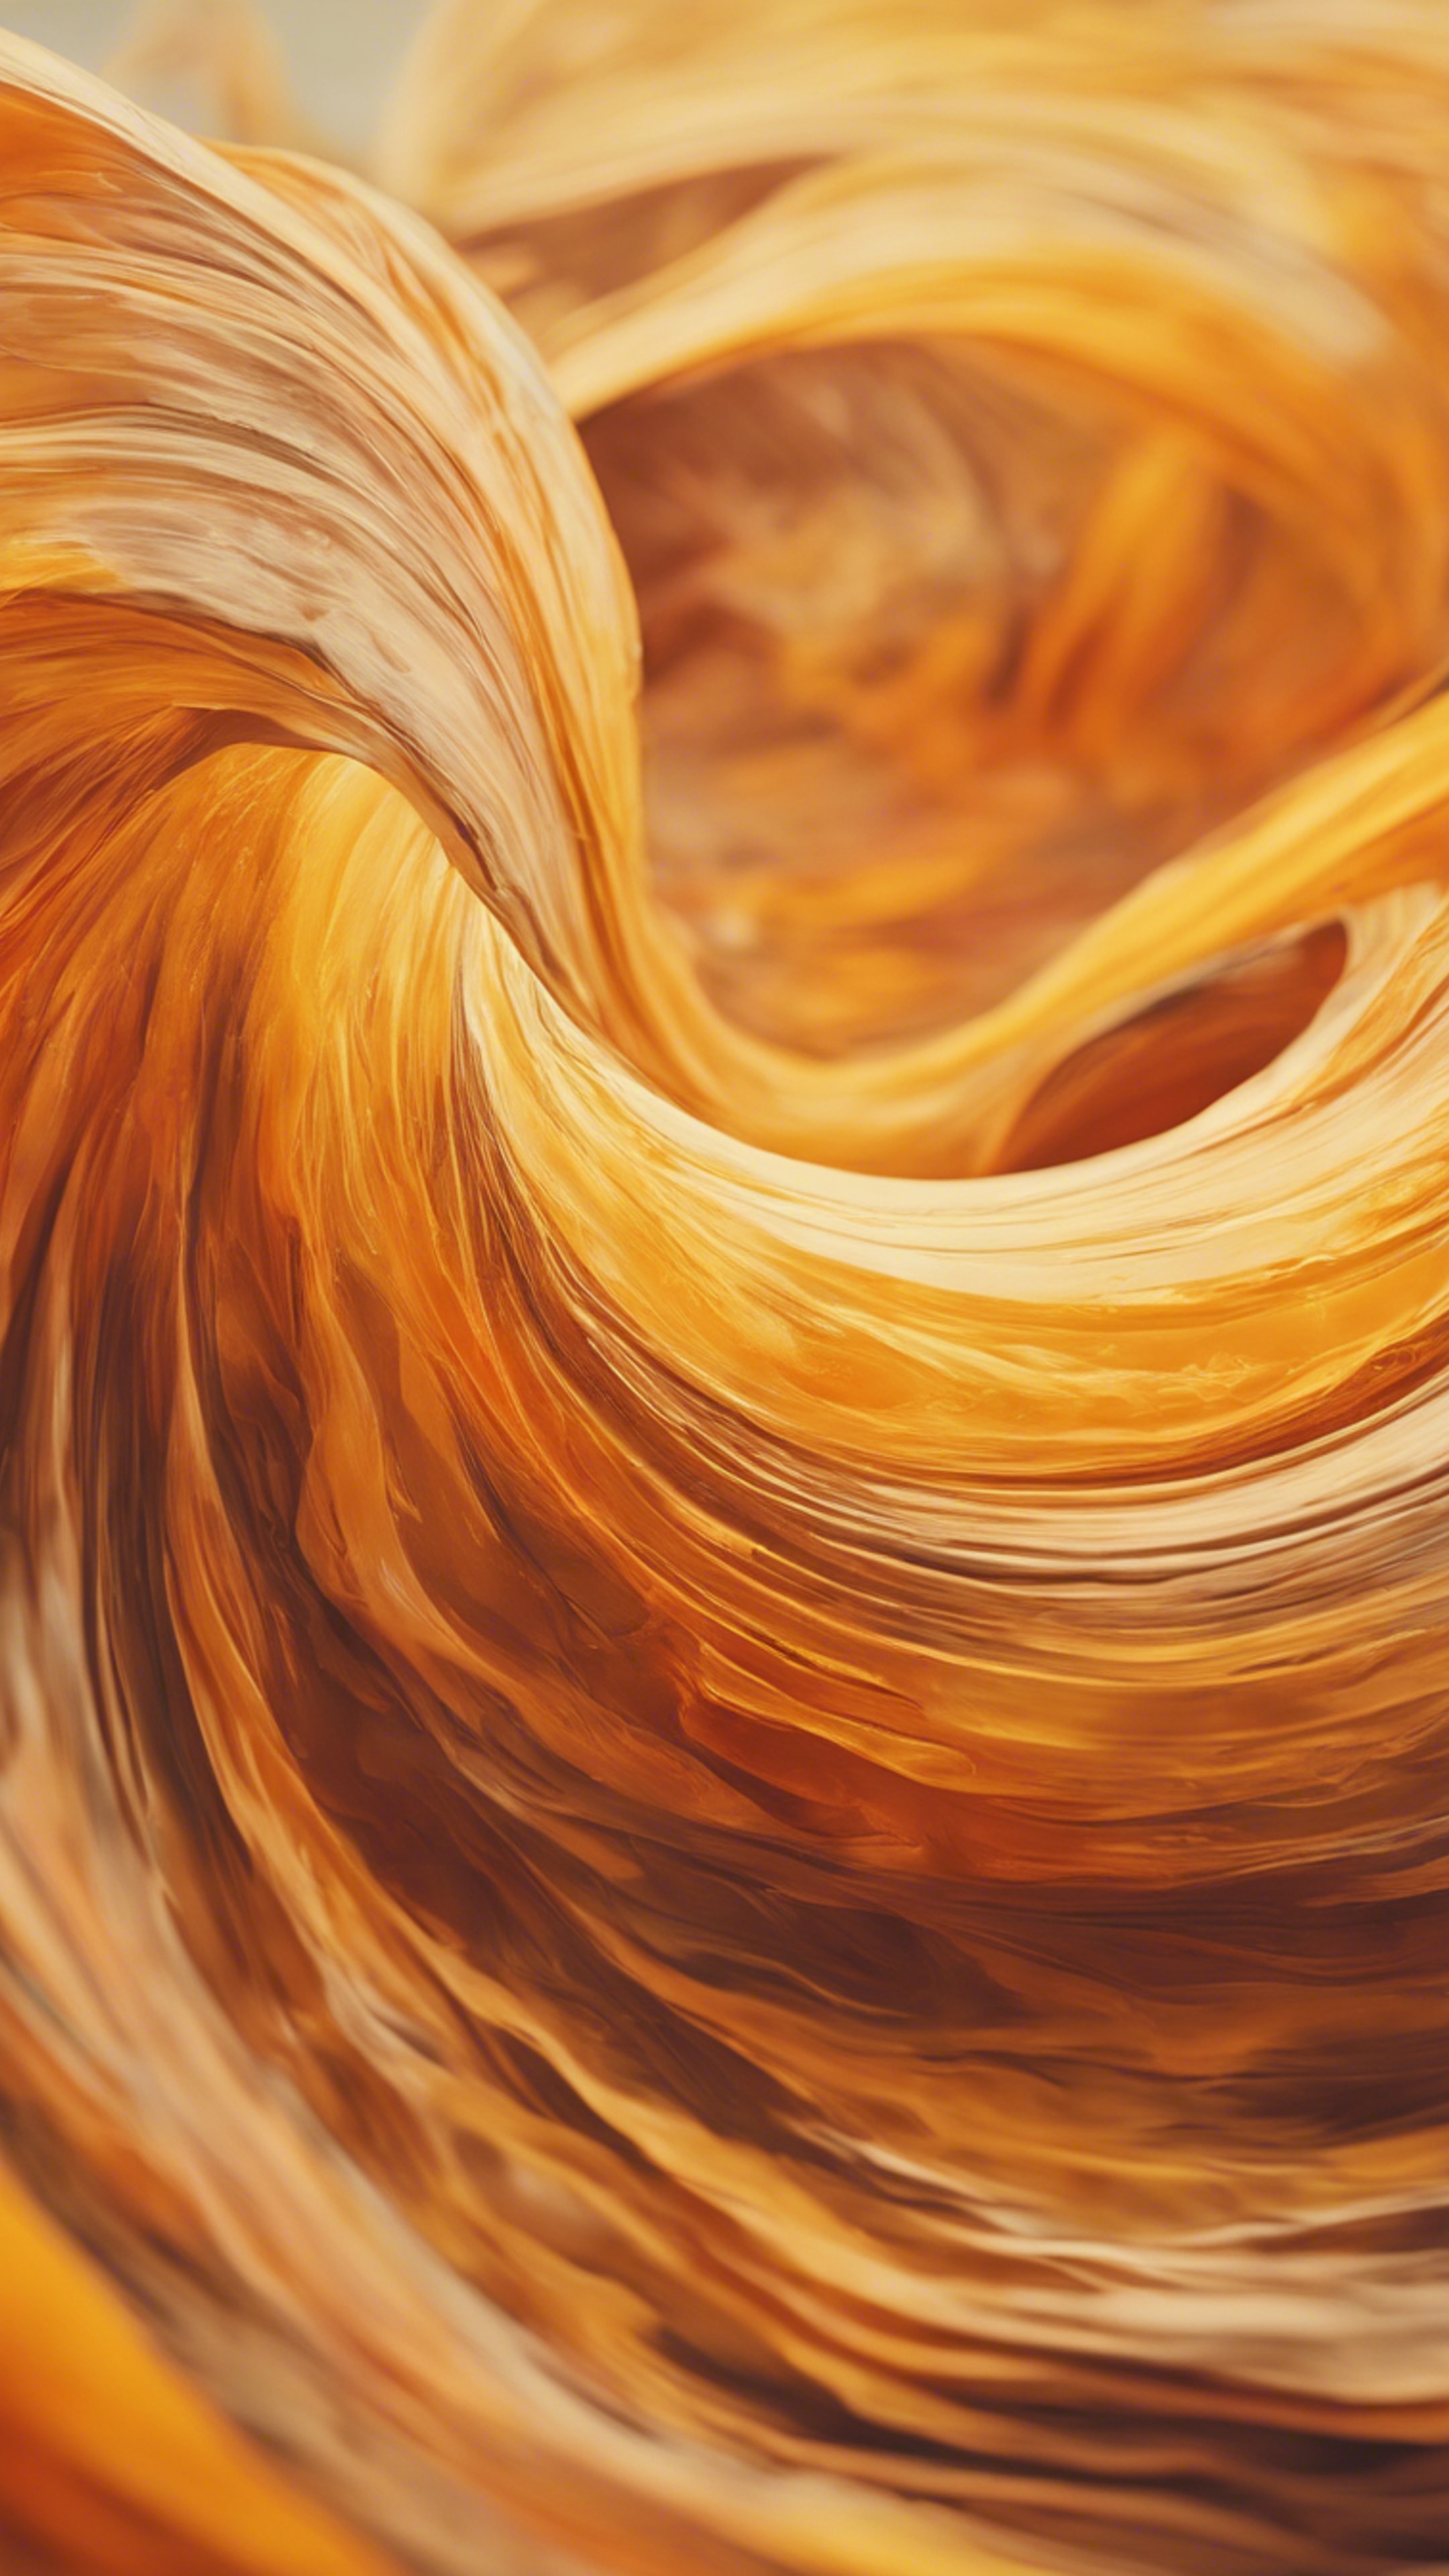 A swirling abstract of yellow and orange hues, reminiscent of a summer sunset.壁紙[a3133b86de5c439da2df]